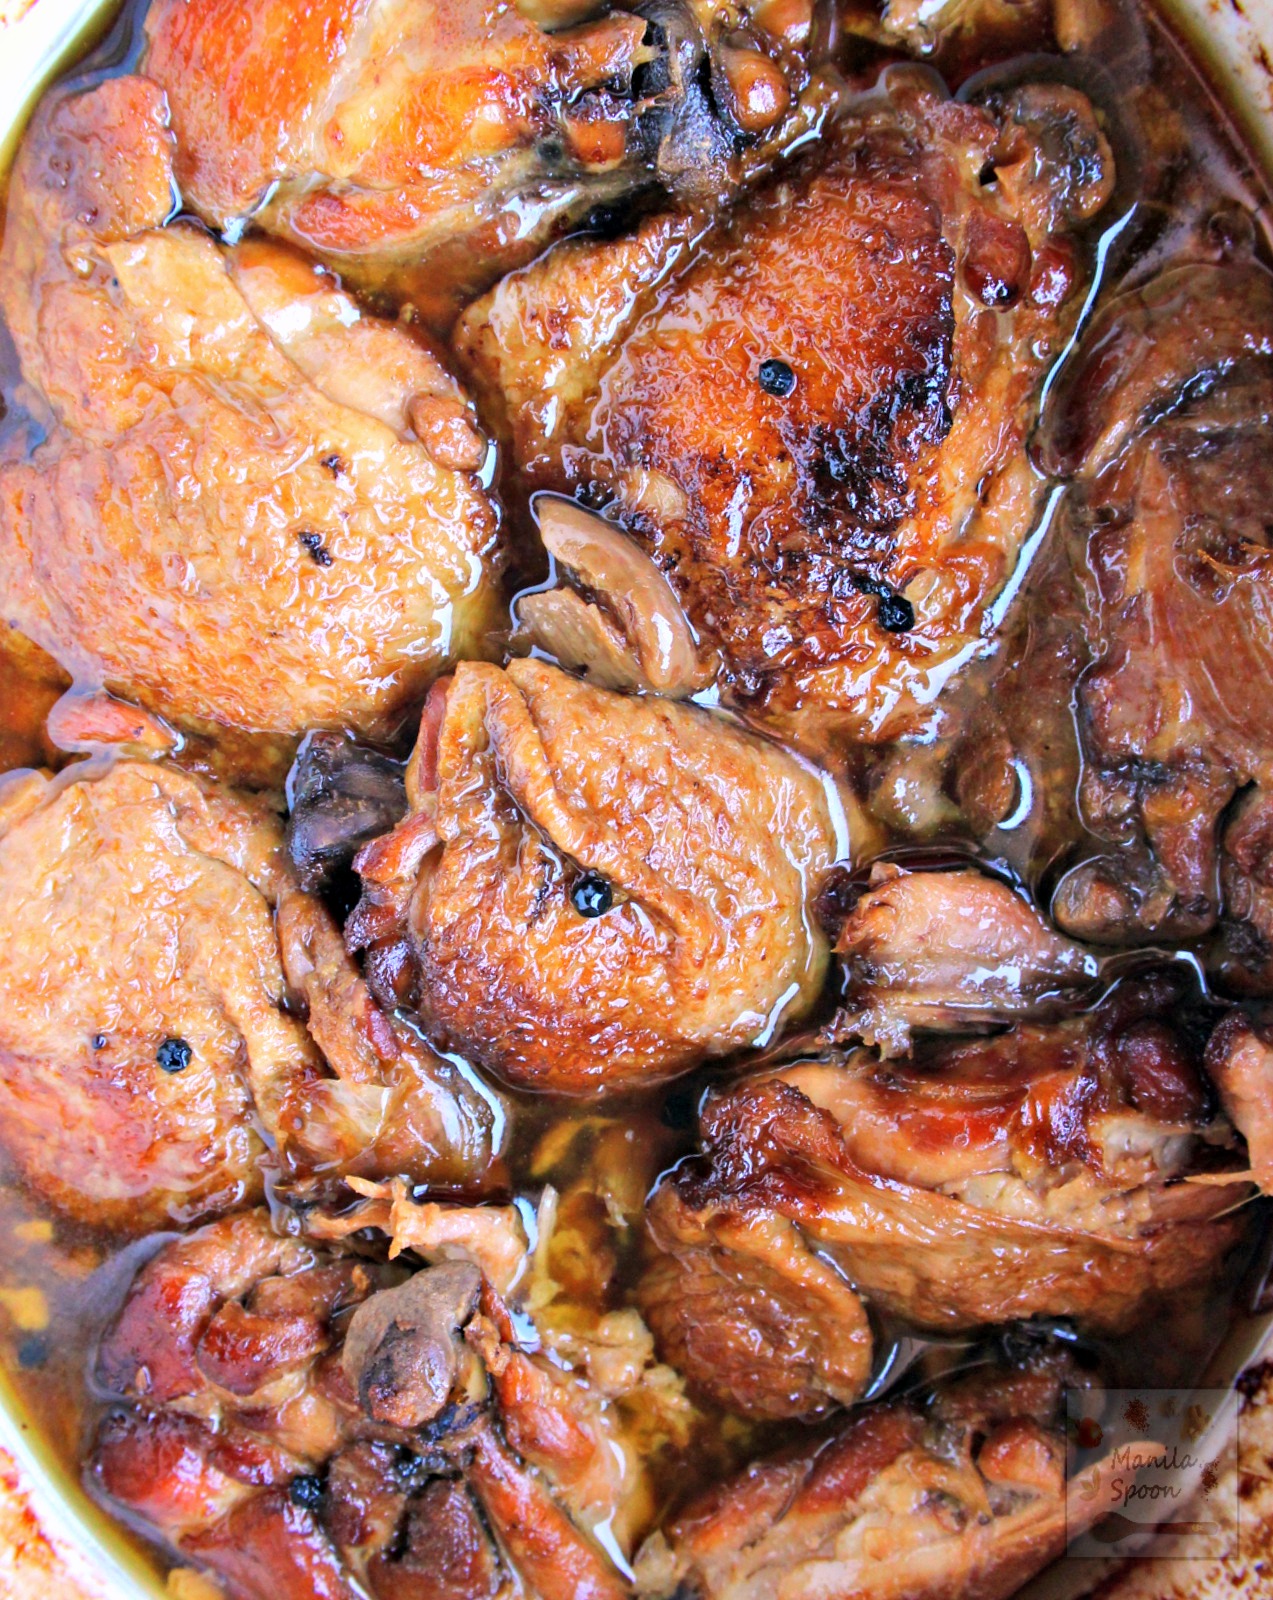 Chicken slowly braised in vinegar, soy sauce, garlic and bay leaves until fall-off-the-bone tender and DELICIOUS. This classic dish can be made a day ahead and tastes even better the next day! Slow Cooker Chicken Adobo | manilaspoon.com